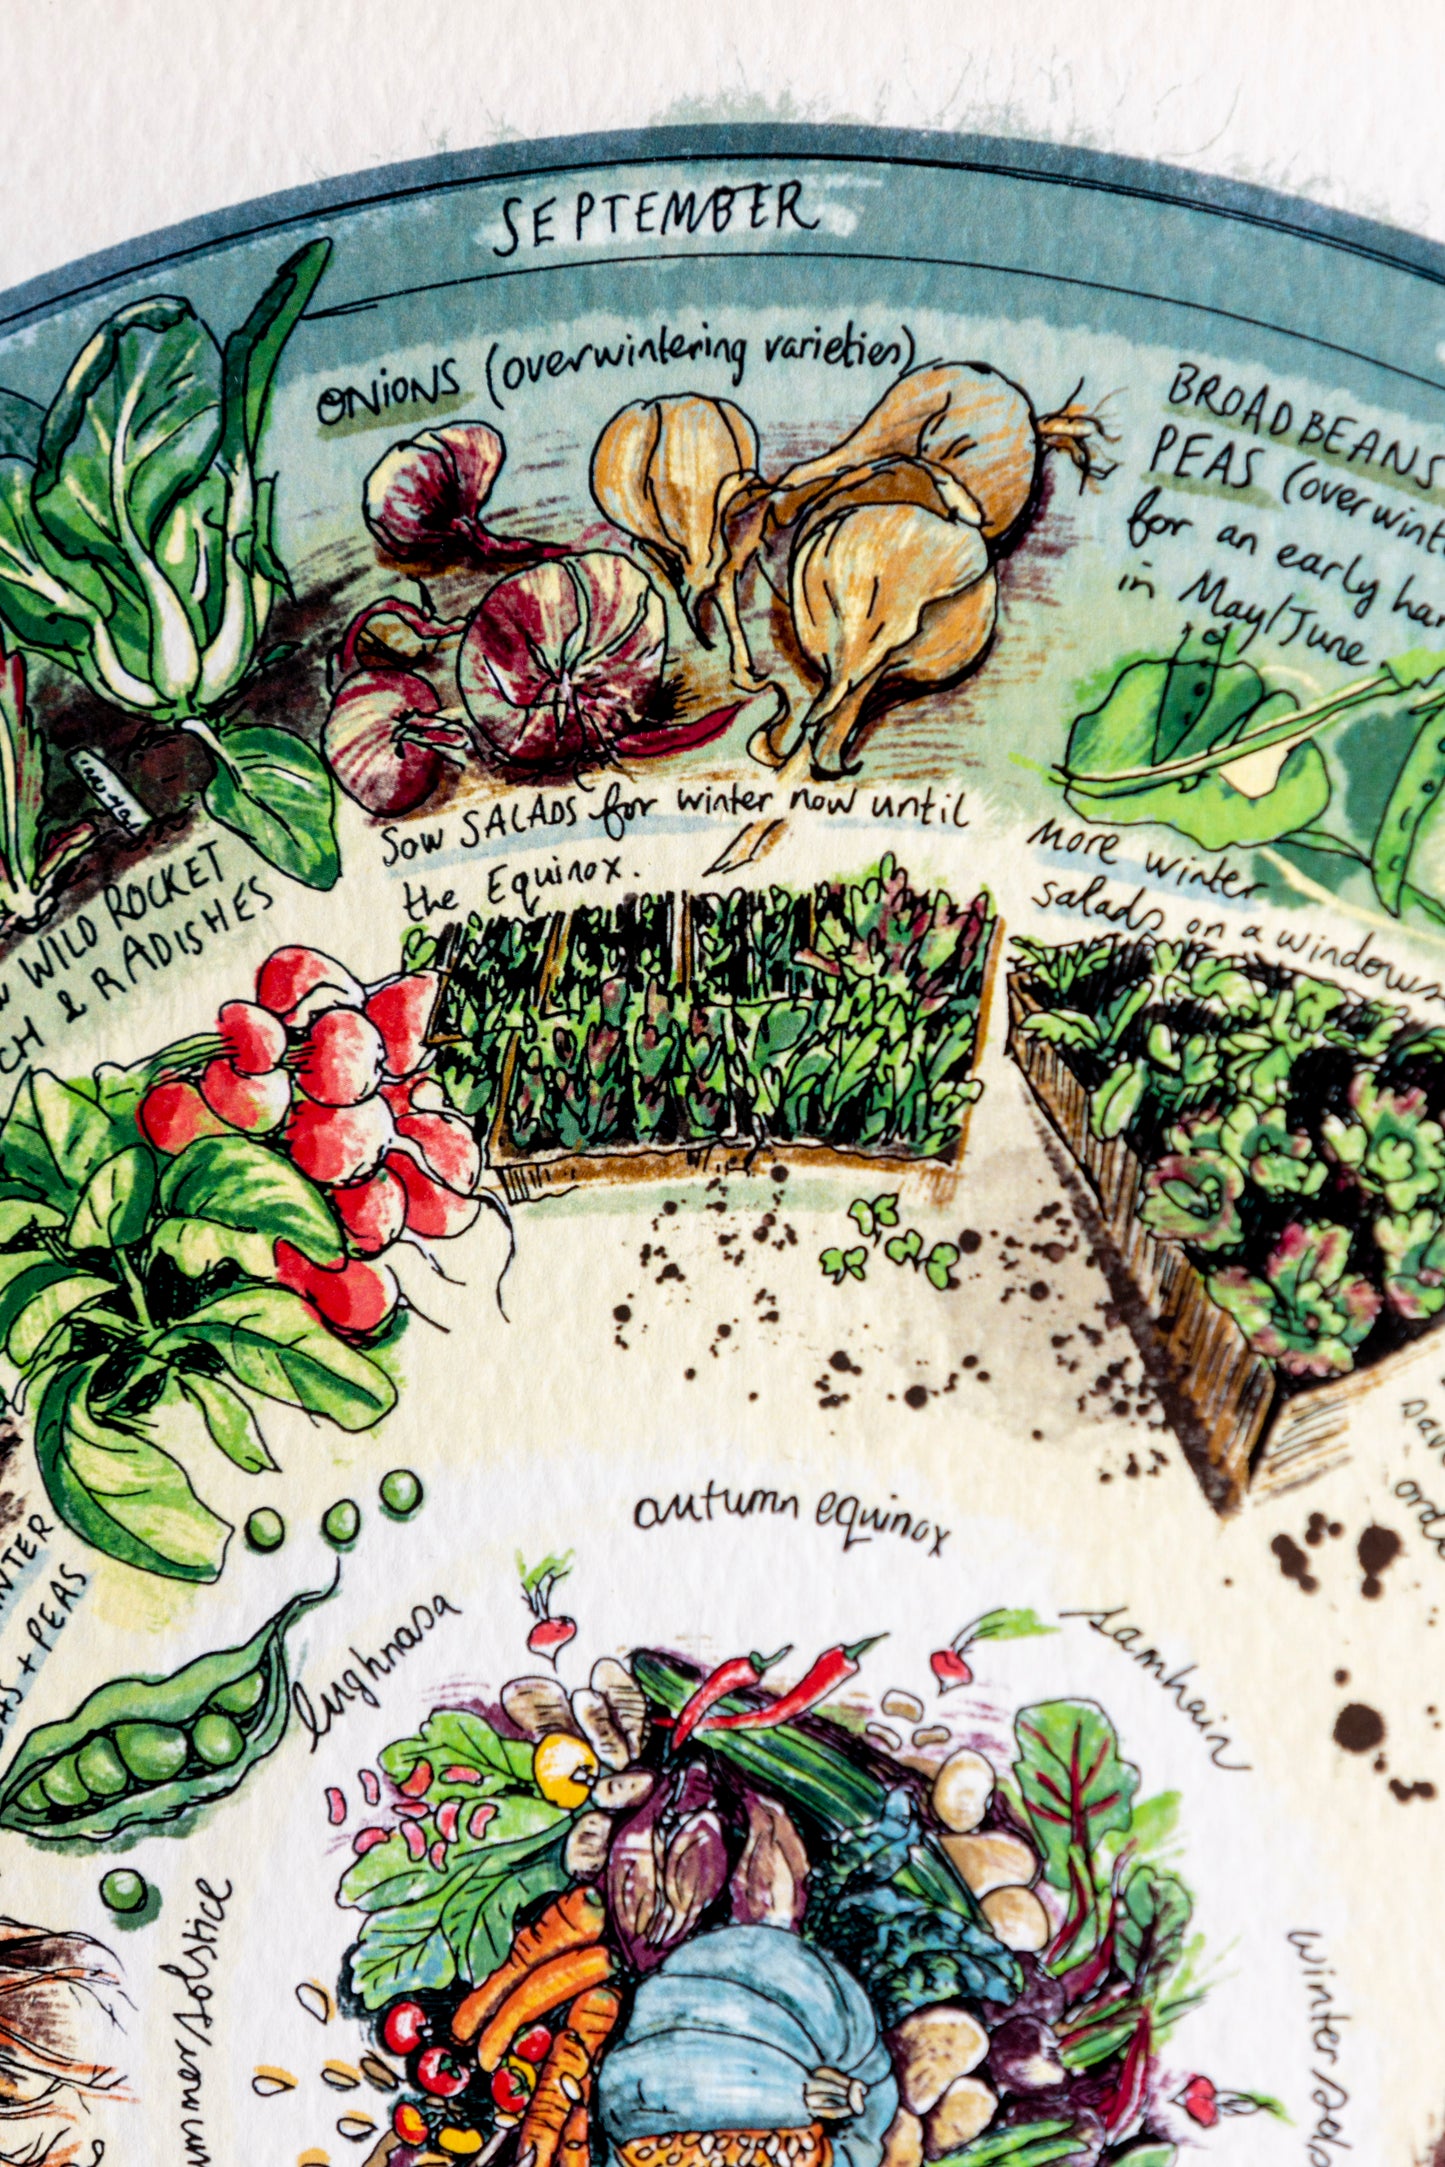 Veg Patch (What to Plant & When) — Limited Edition Print on Paper